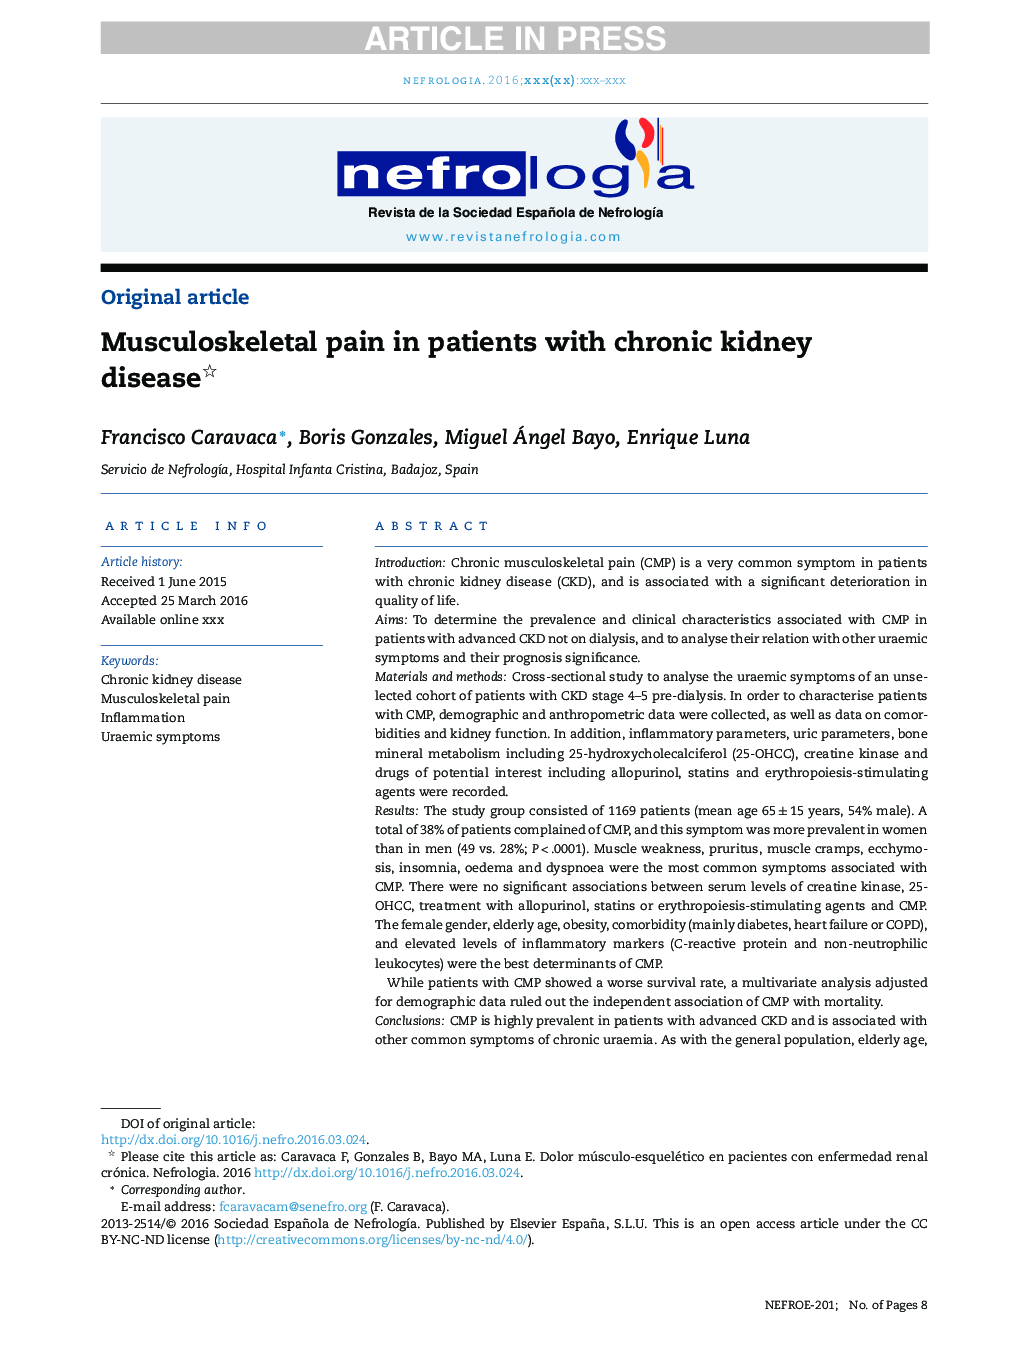 Musculoskeletal pain in patients with chronic kidney disease